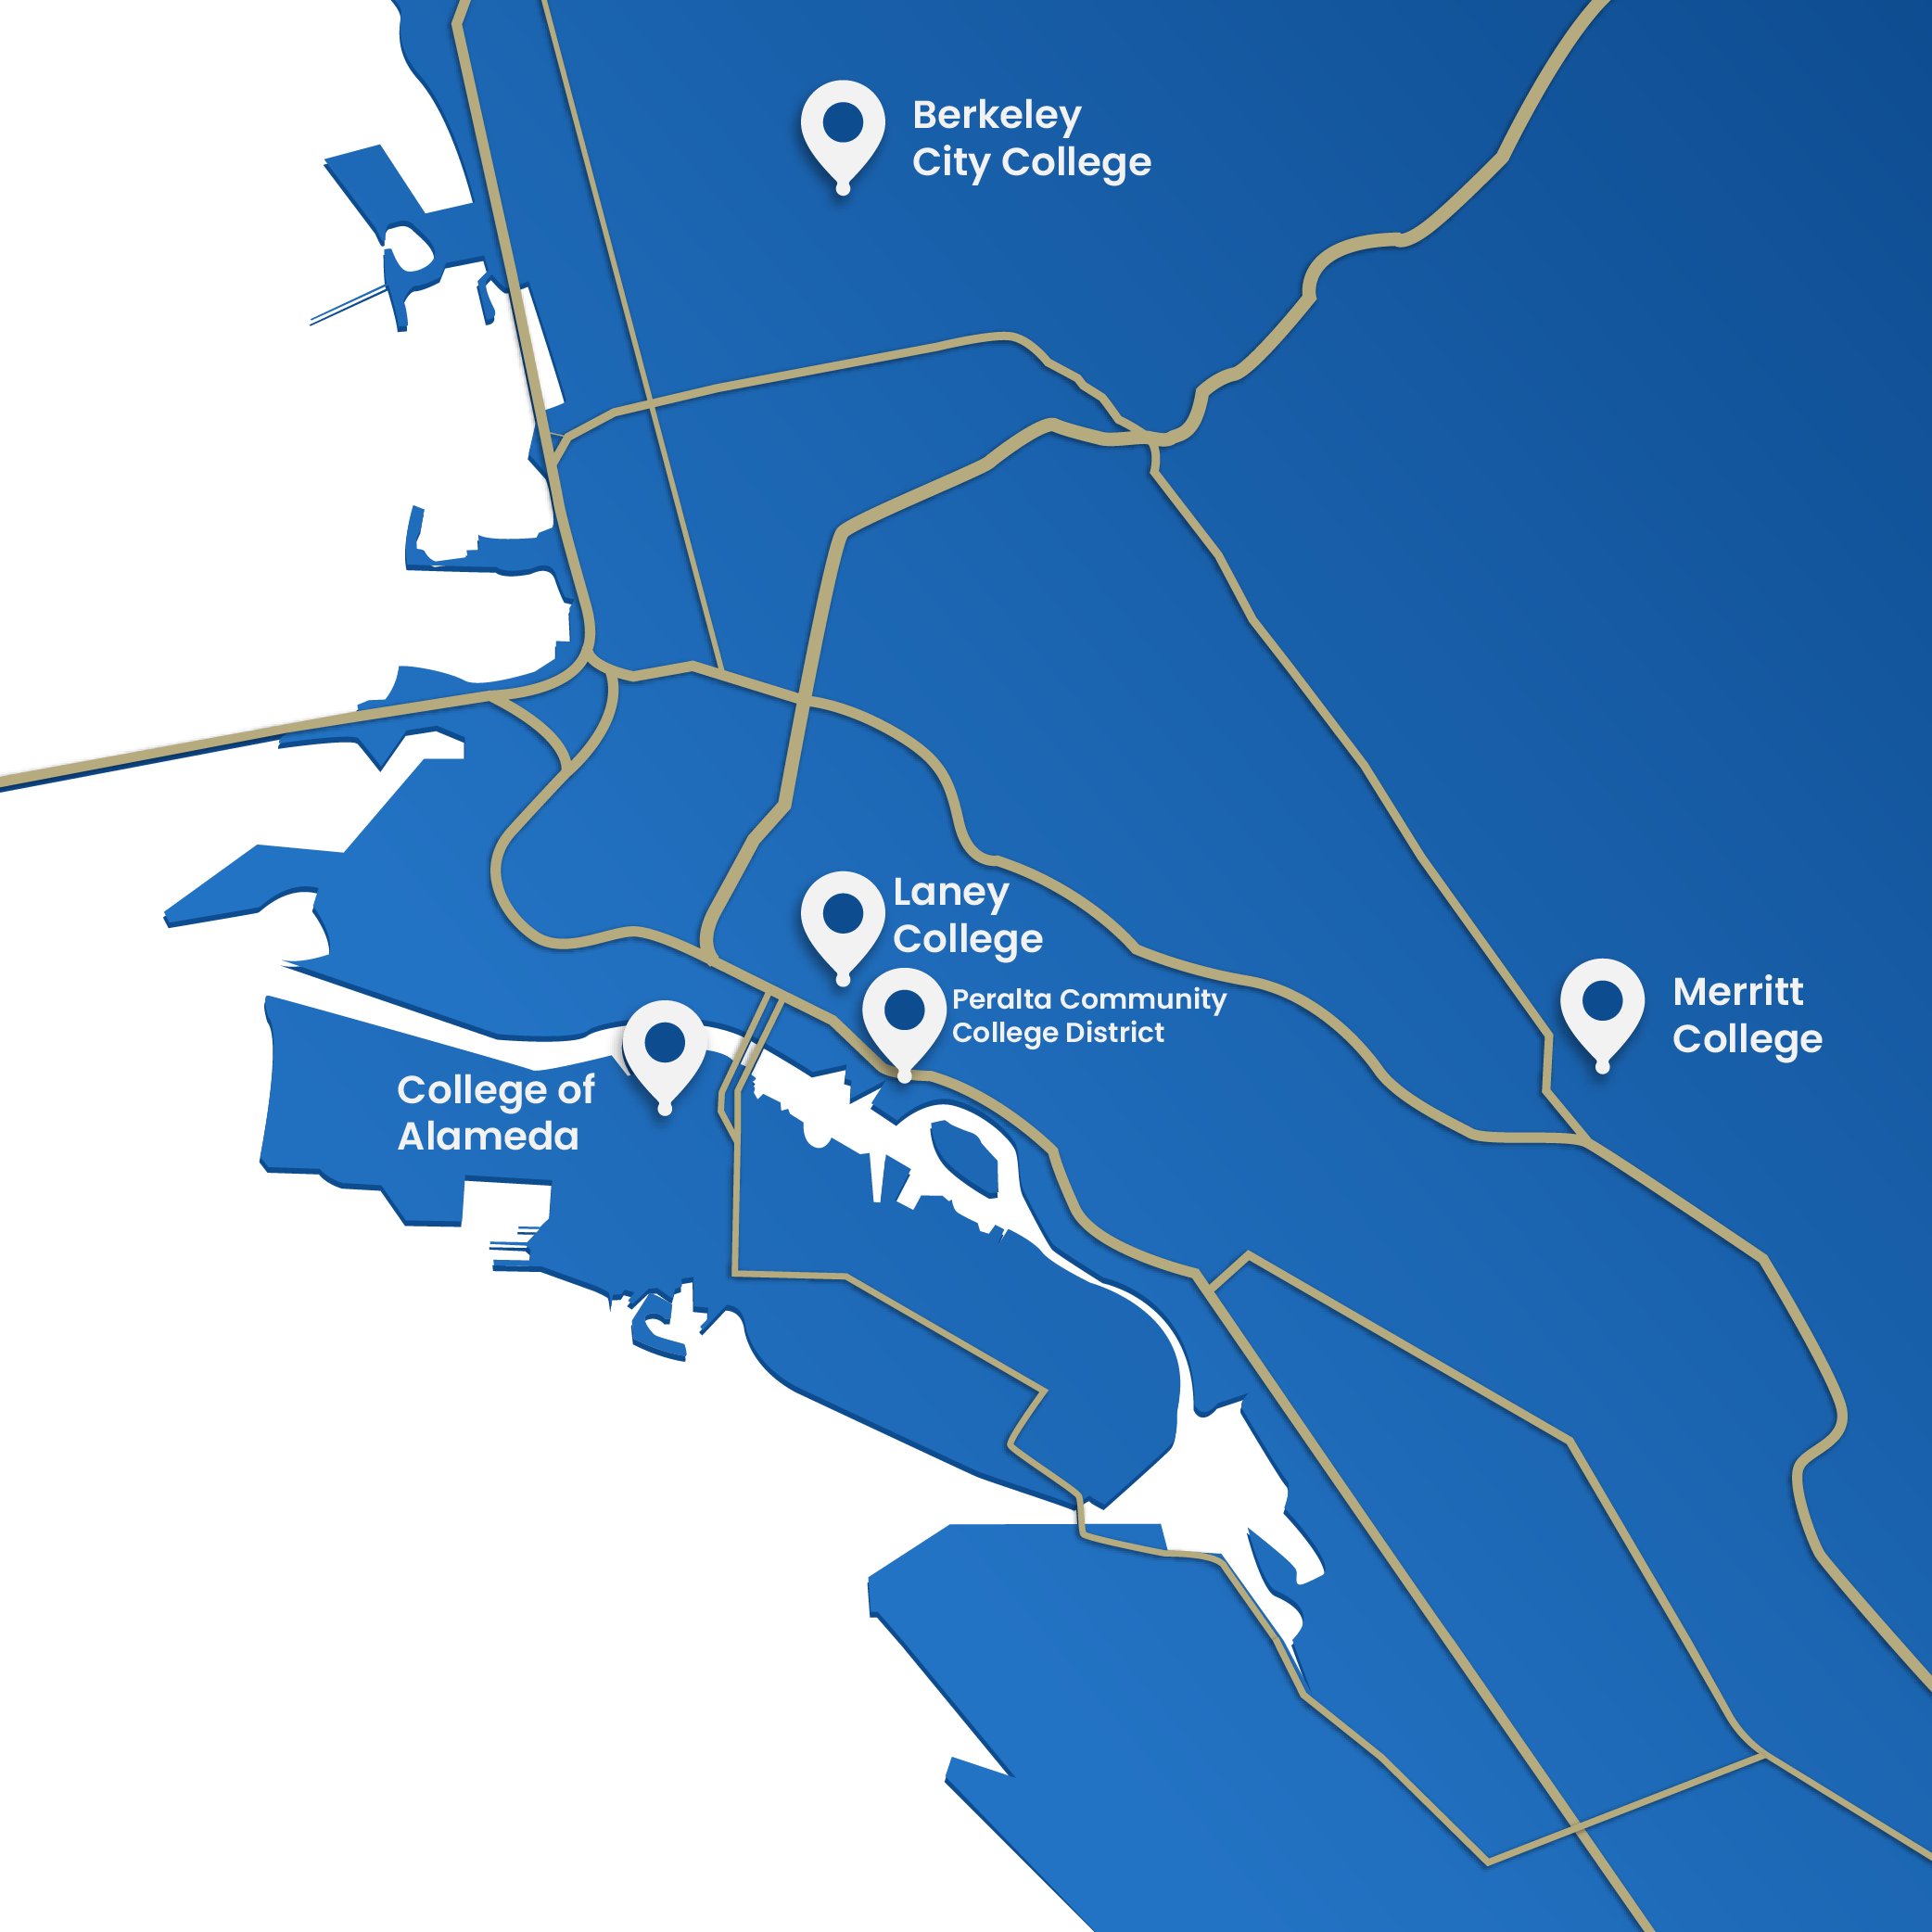  Map of all 4 colleges in the district